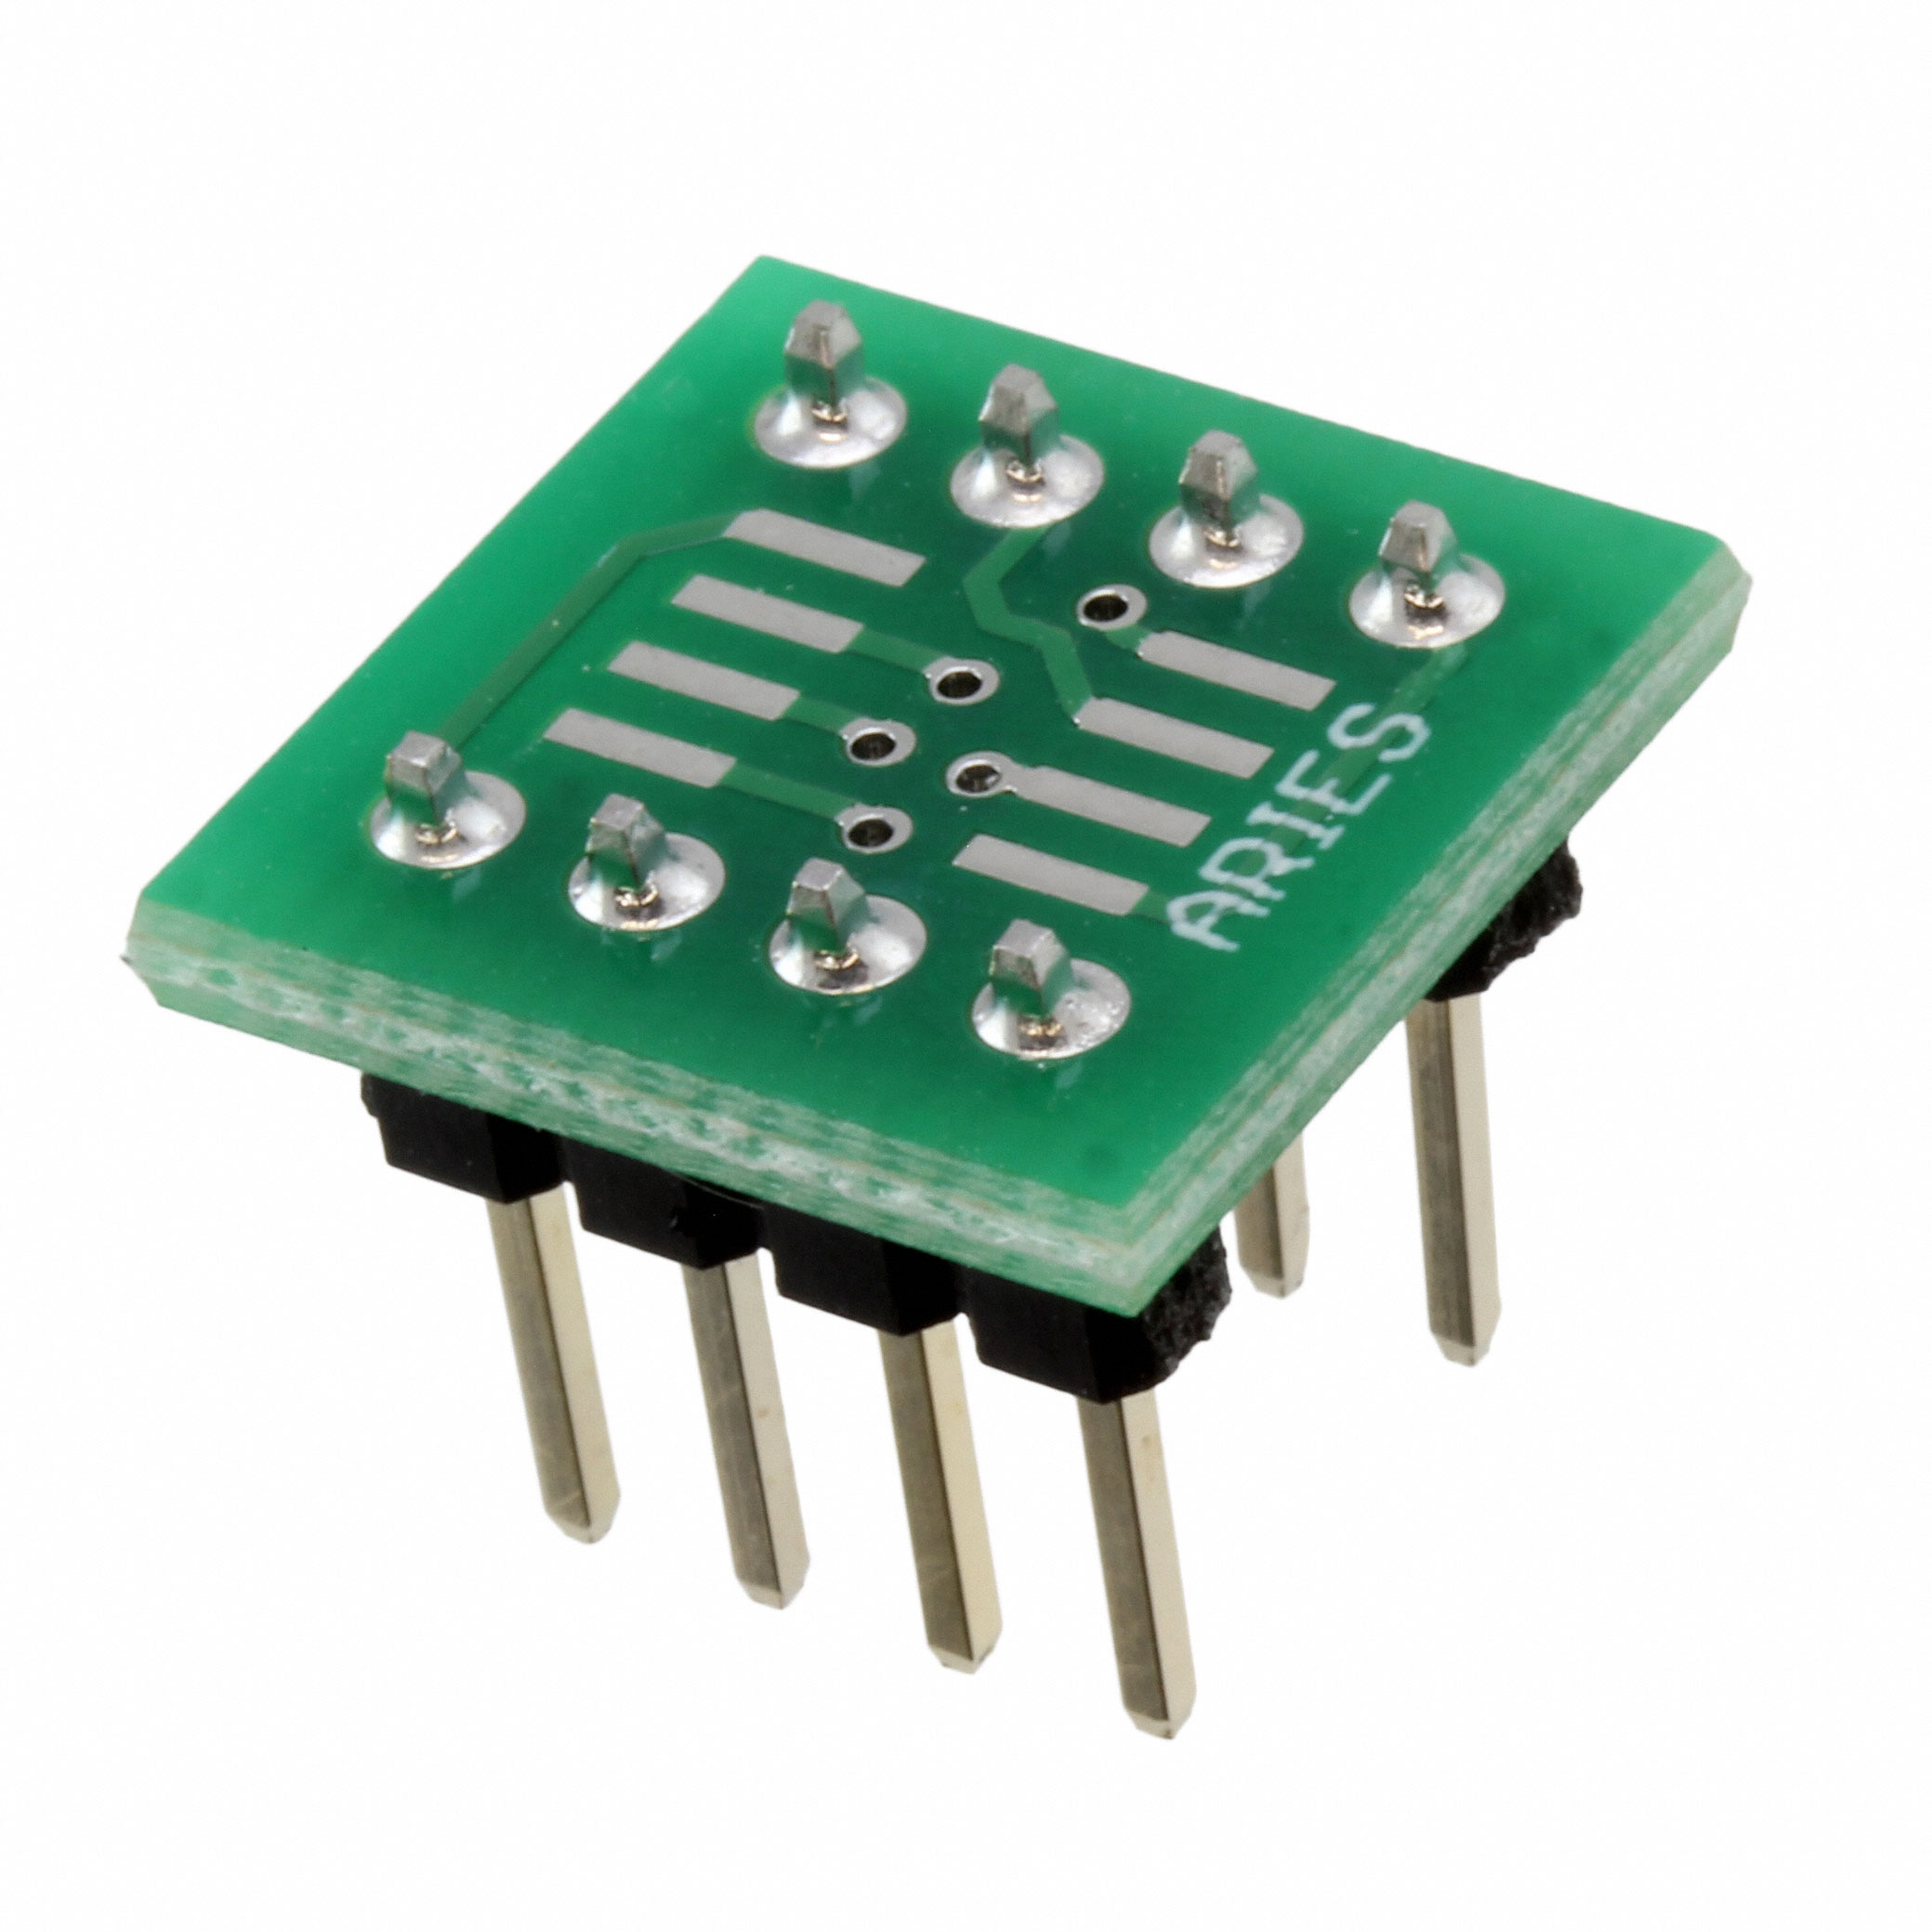 【LCQT-SOIC8-8】SOCKET ADAPTER SOIC TO 8DIP